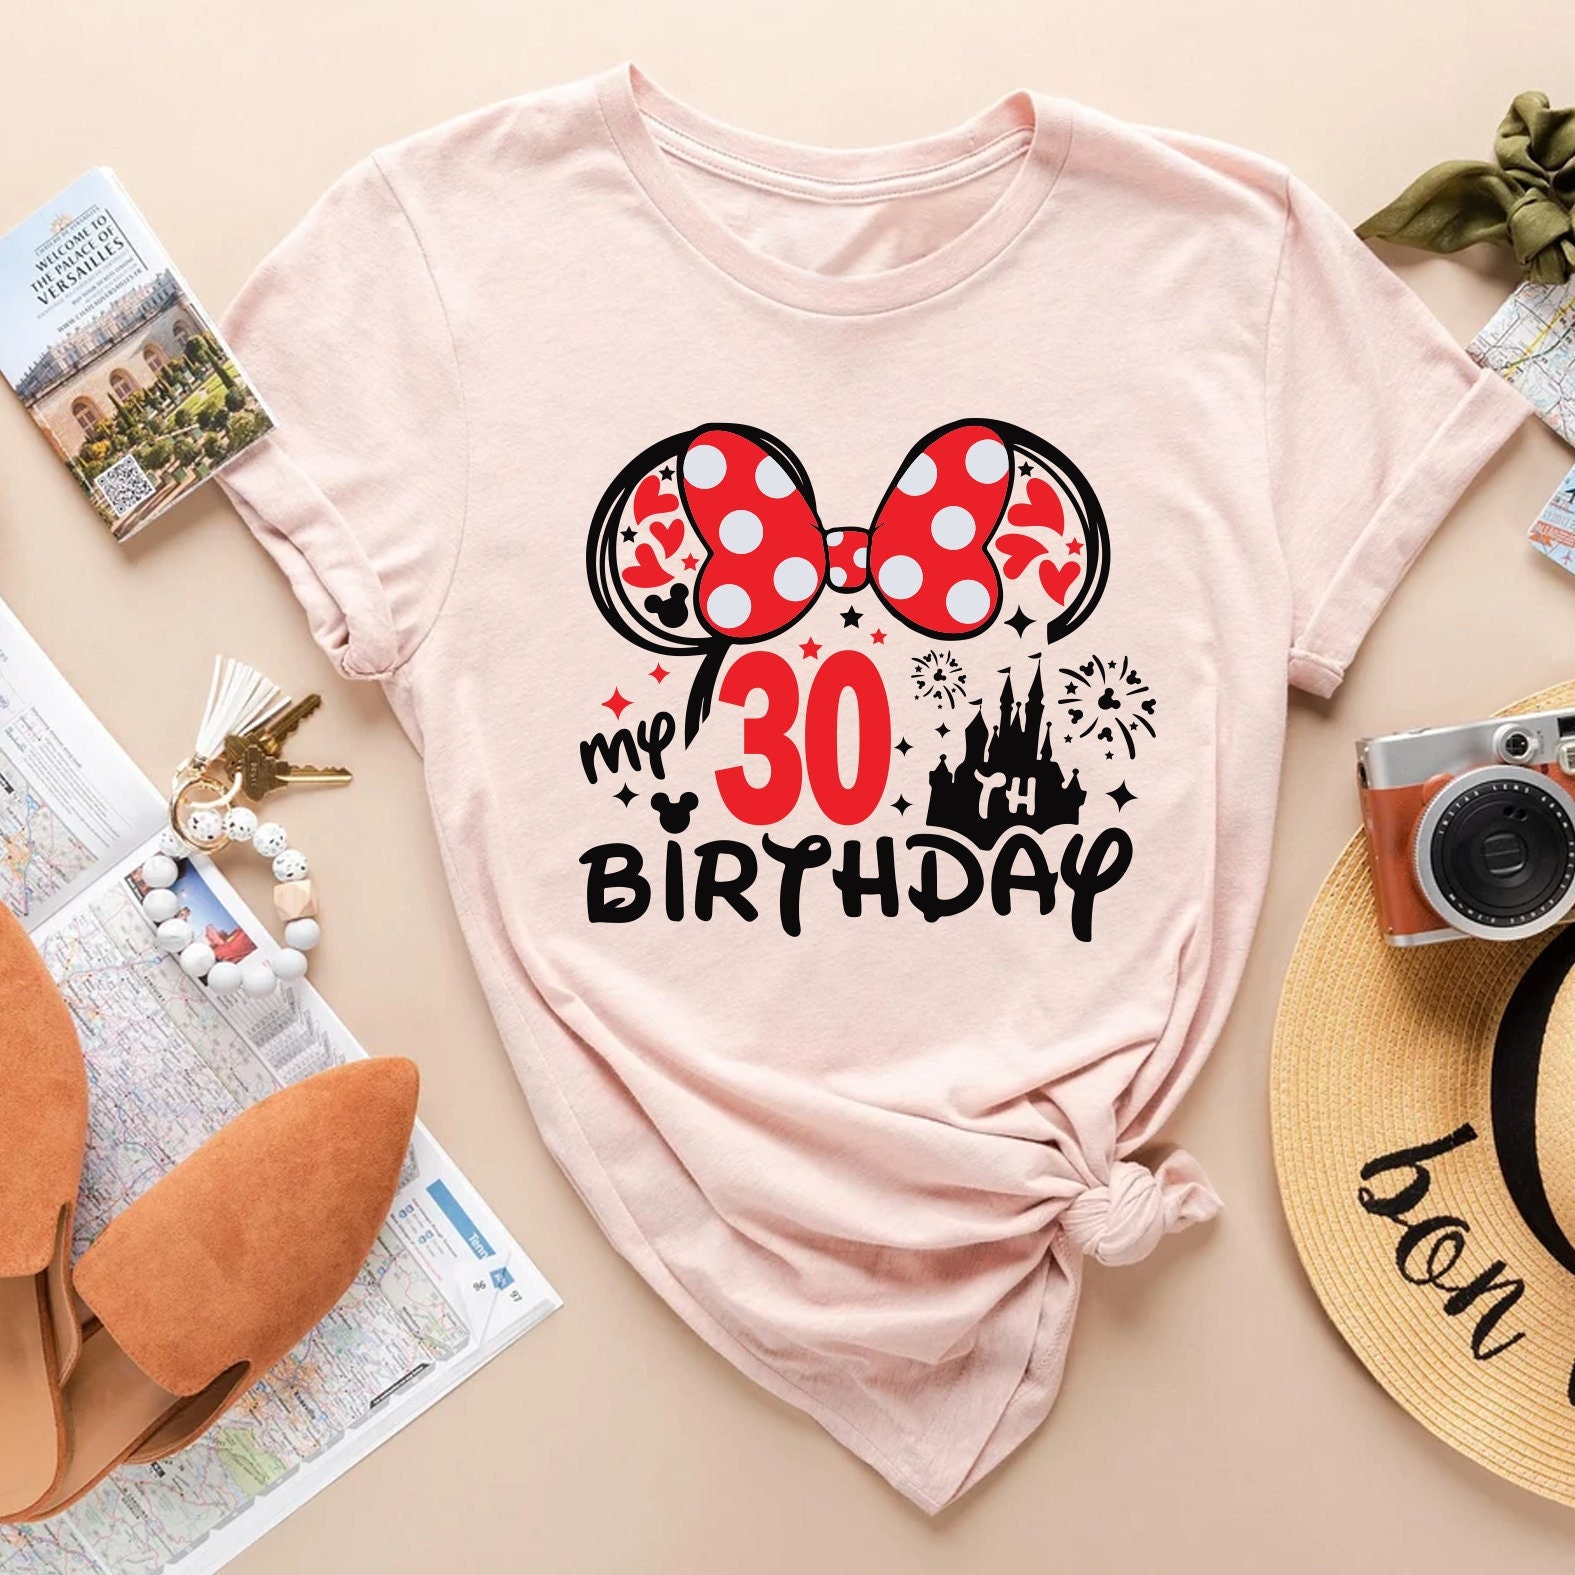 30 Years Old Shirt - Etsy